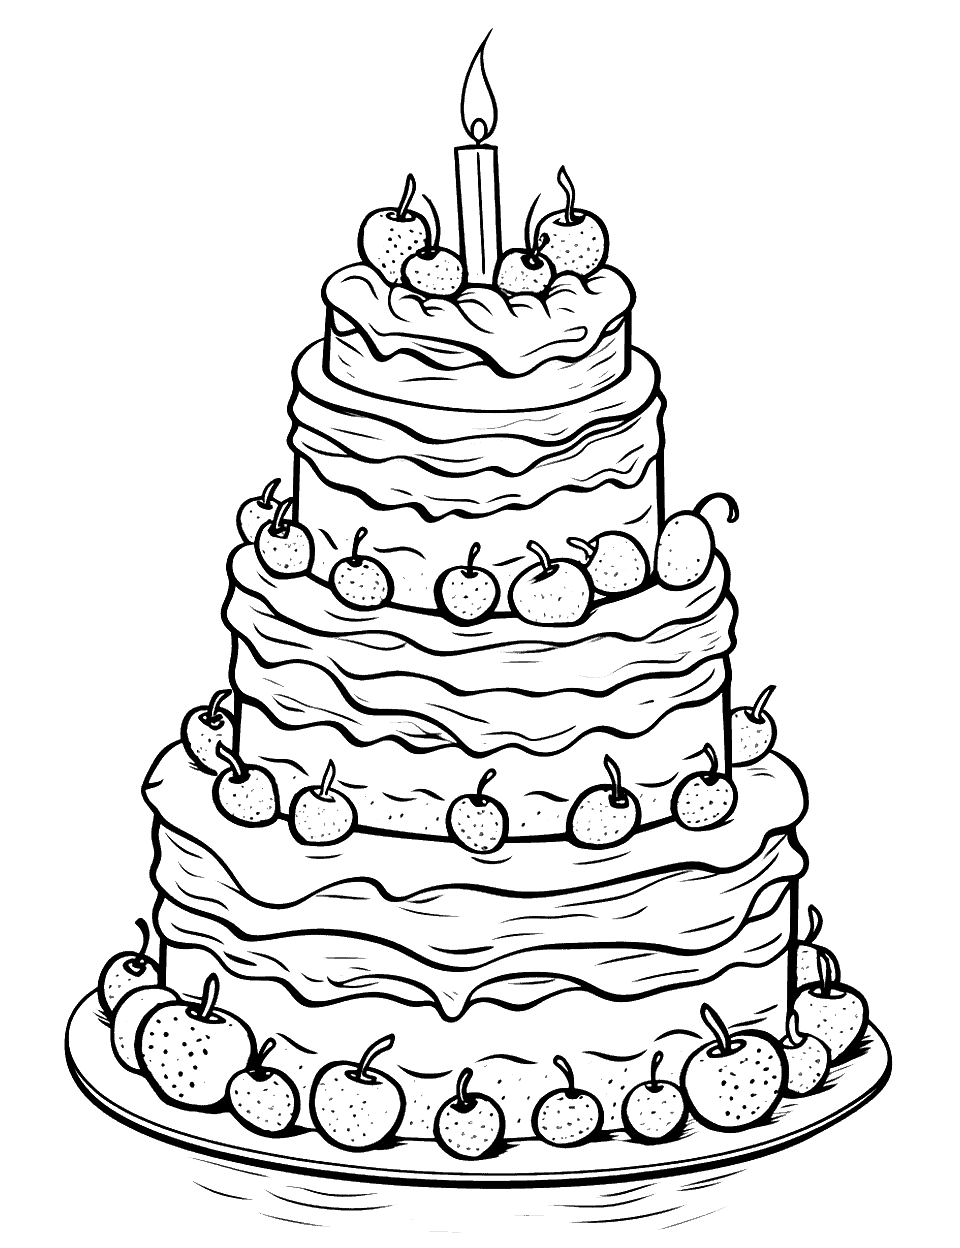 Layered Surprise Cake Coloring Page - A tall cake with multiple layers decorated.